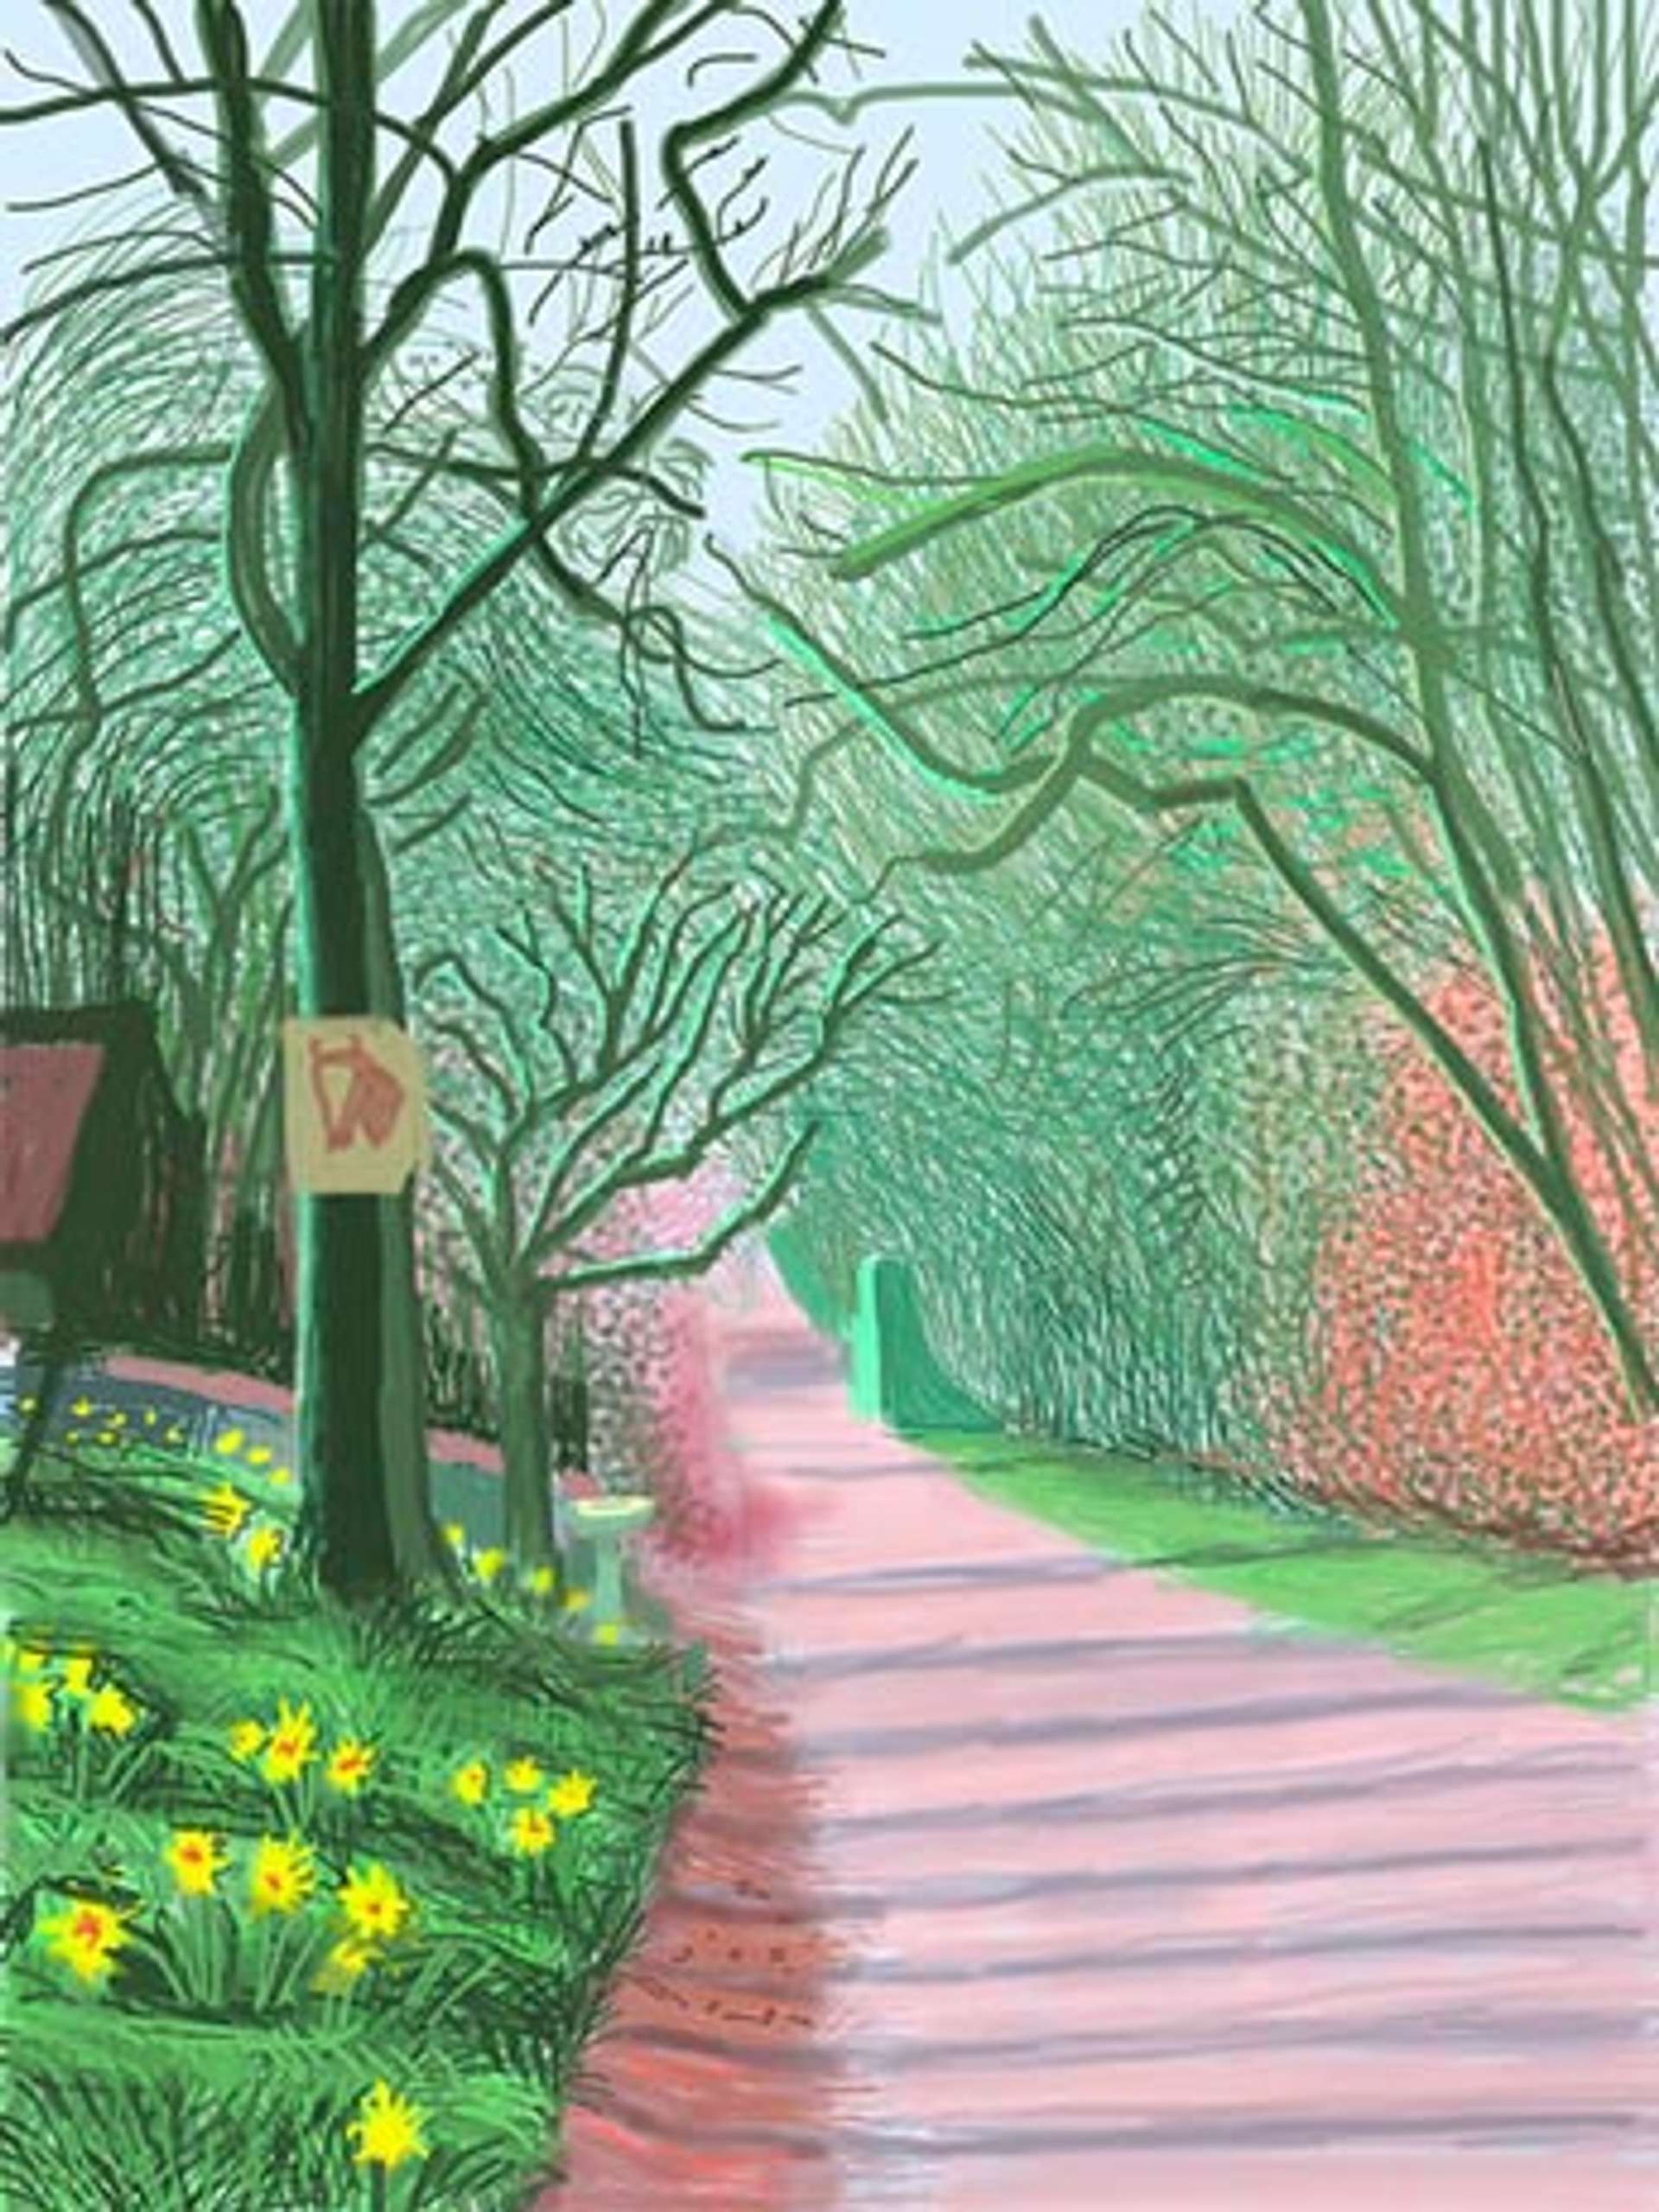 The Arrival Of Spring In Woldgate East Yorkshire 25th March 2011 - Signed Print by David Hockney 2011 - MyArtBroker